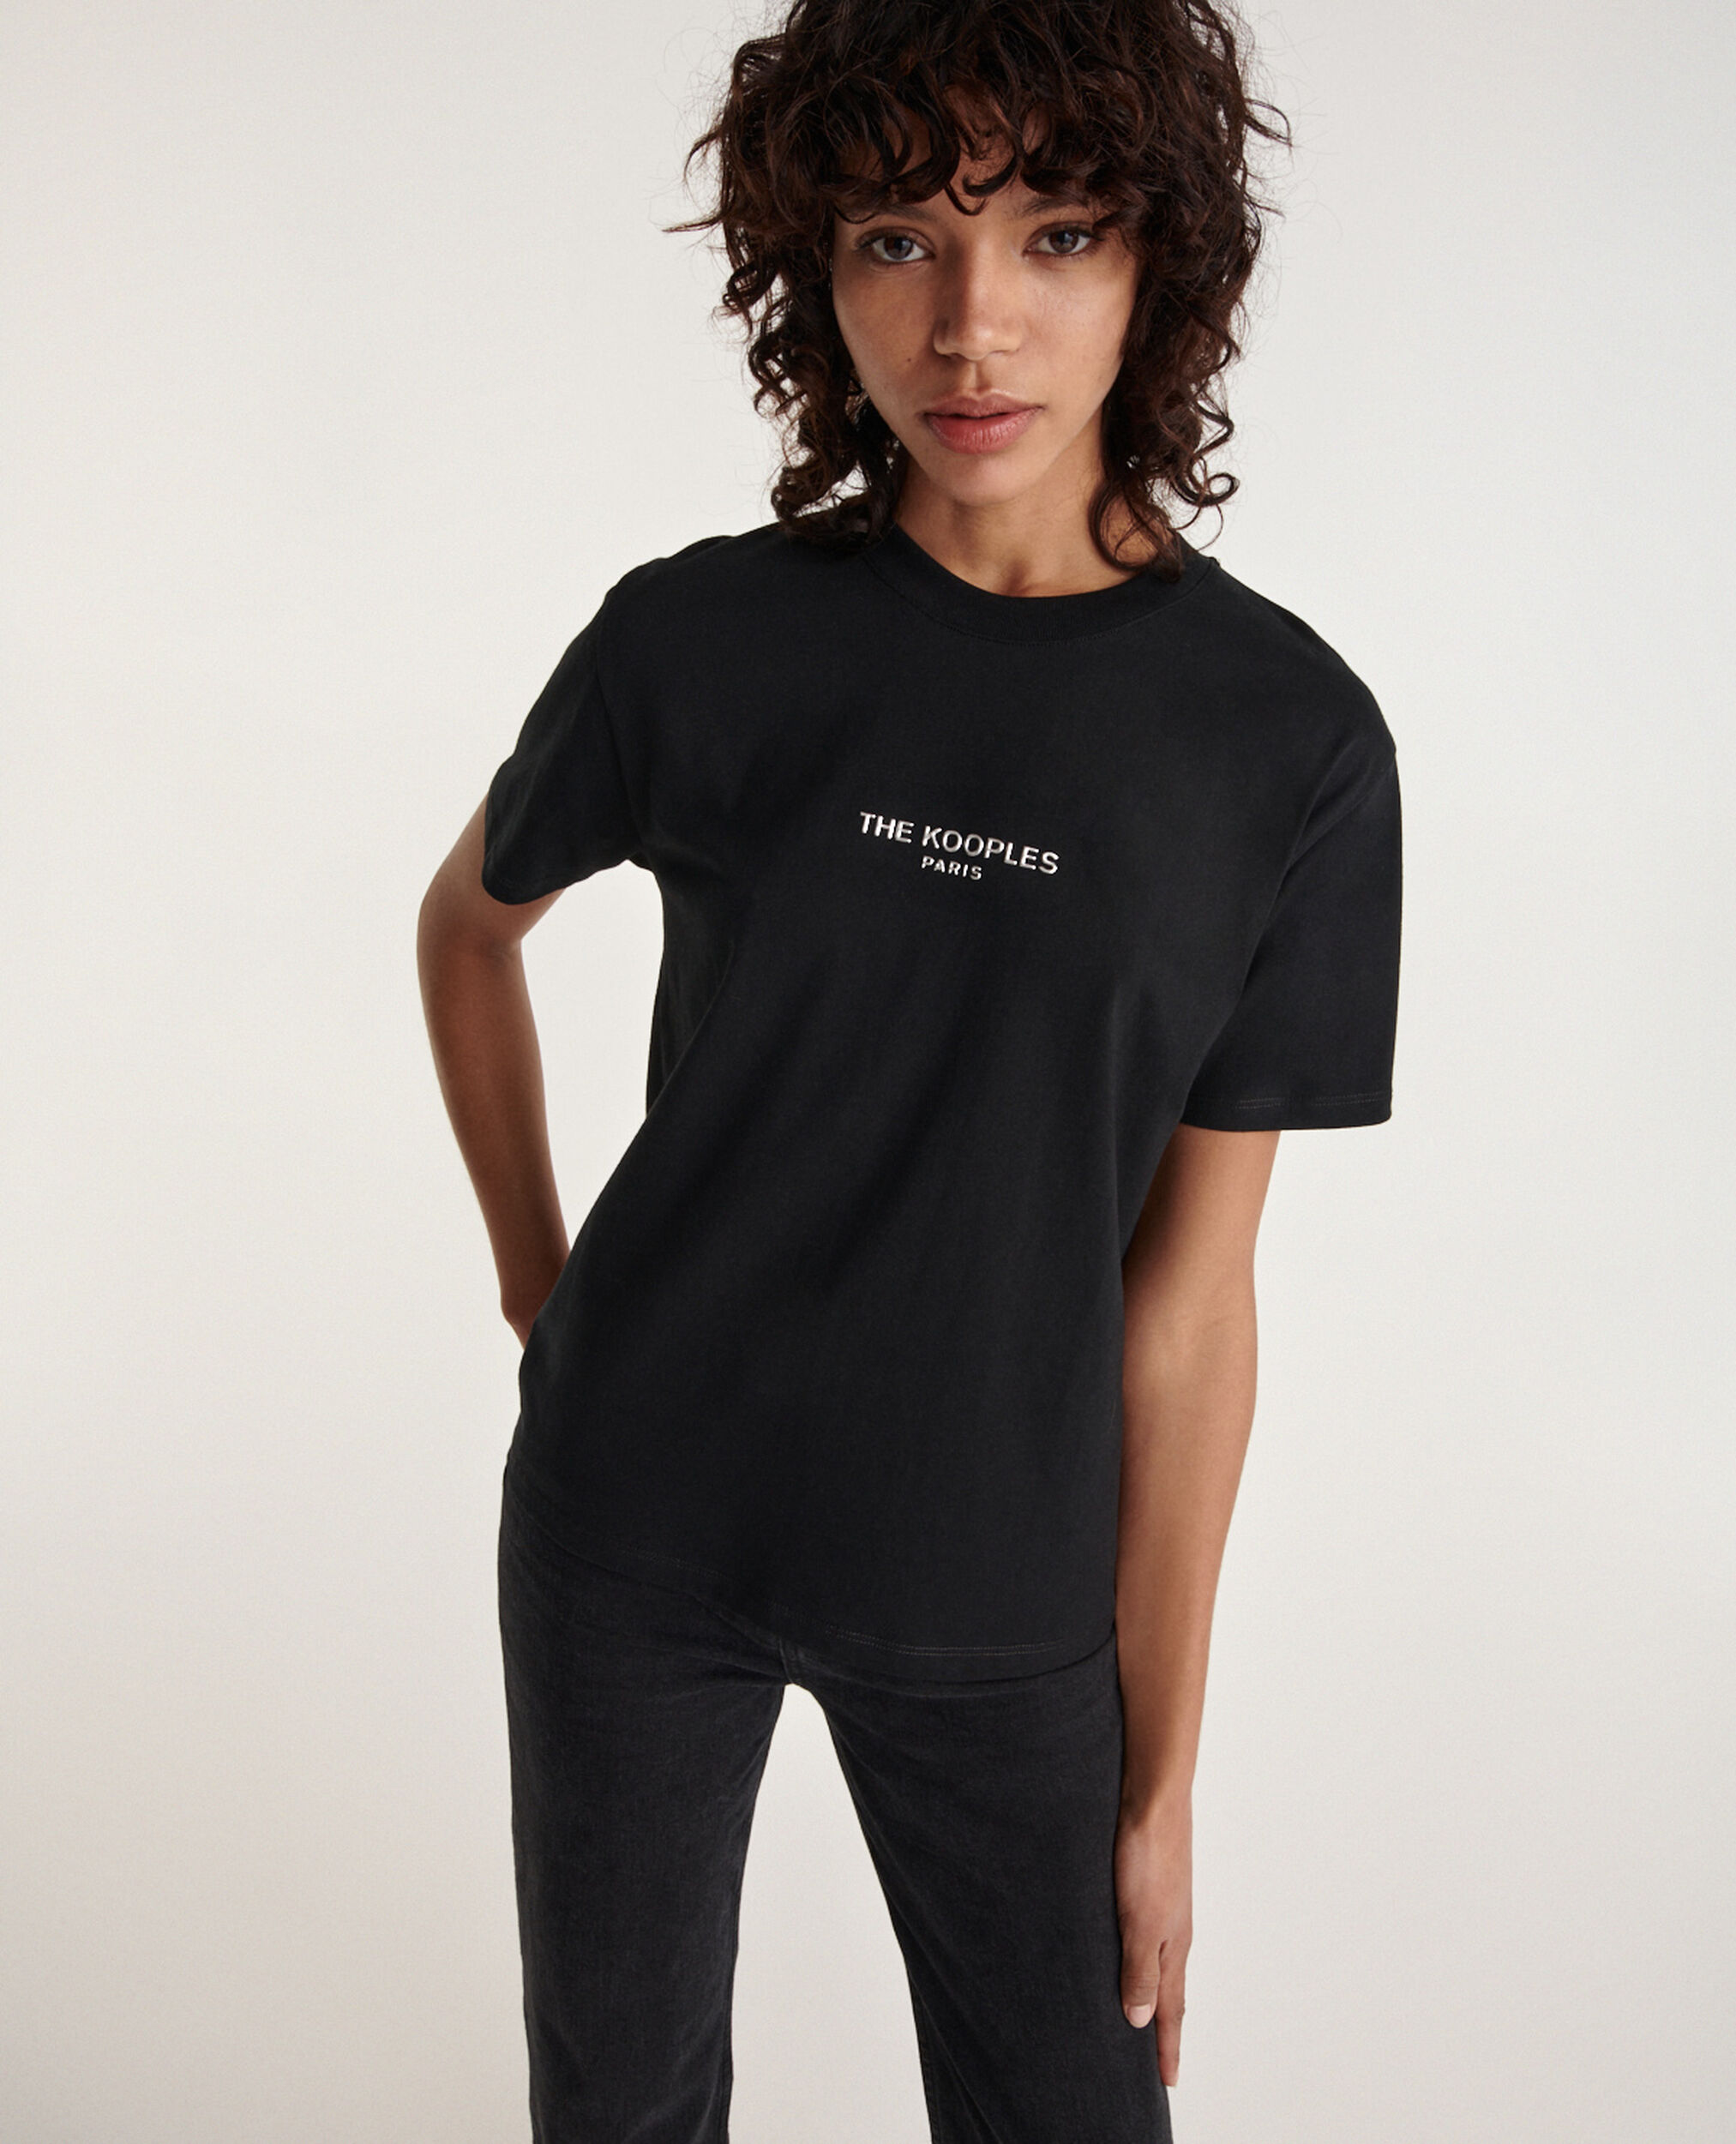 Black cotton T-shirt with silver logo, BLACK, hi-res image number null